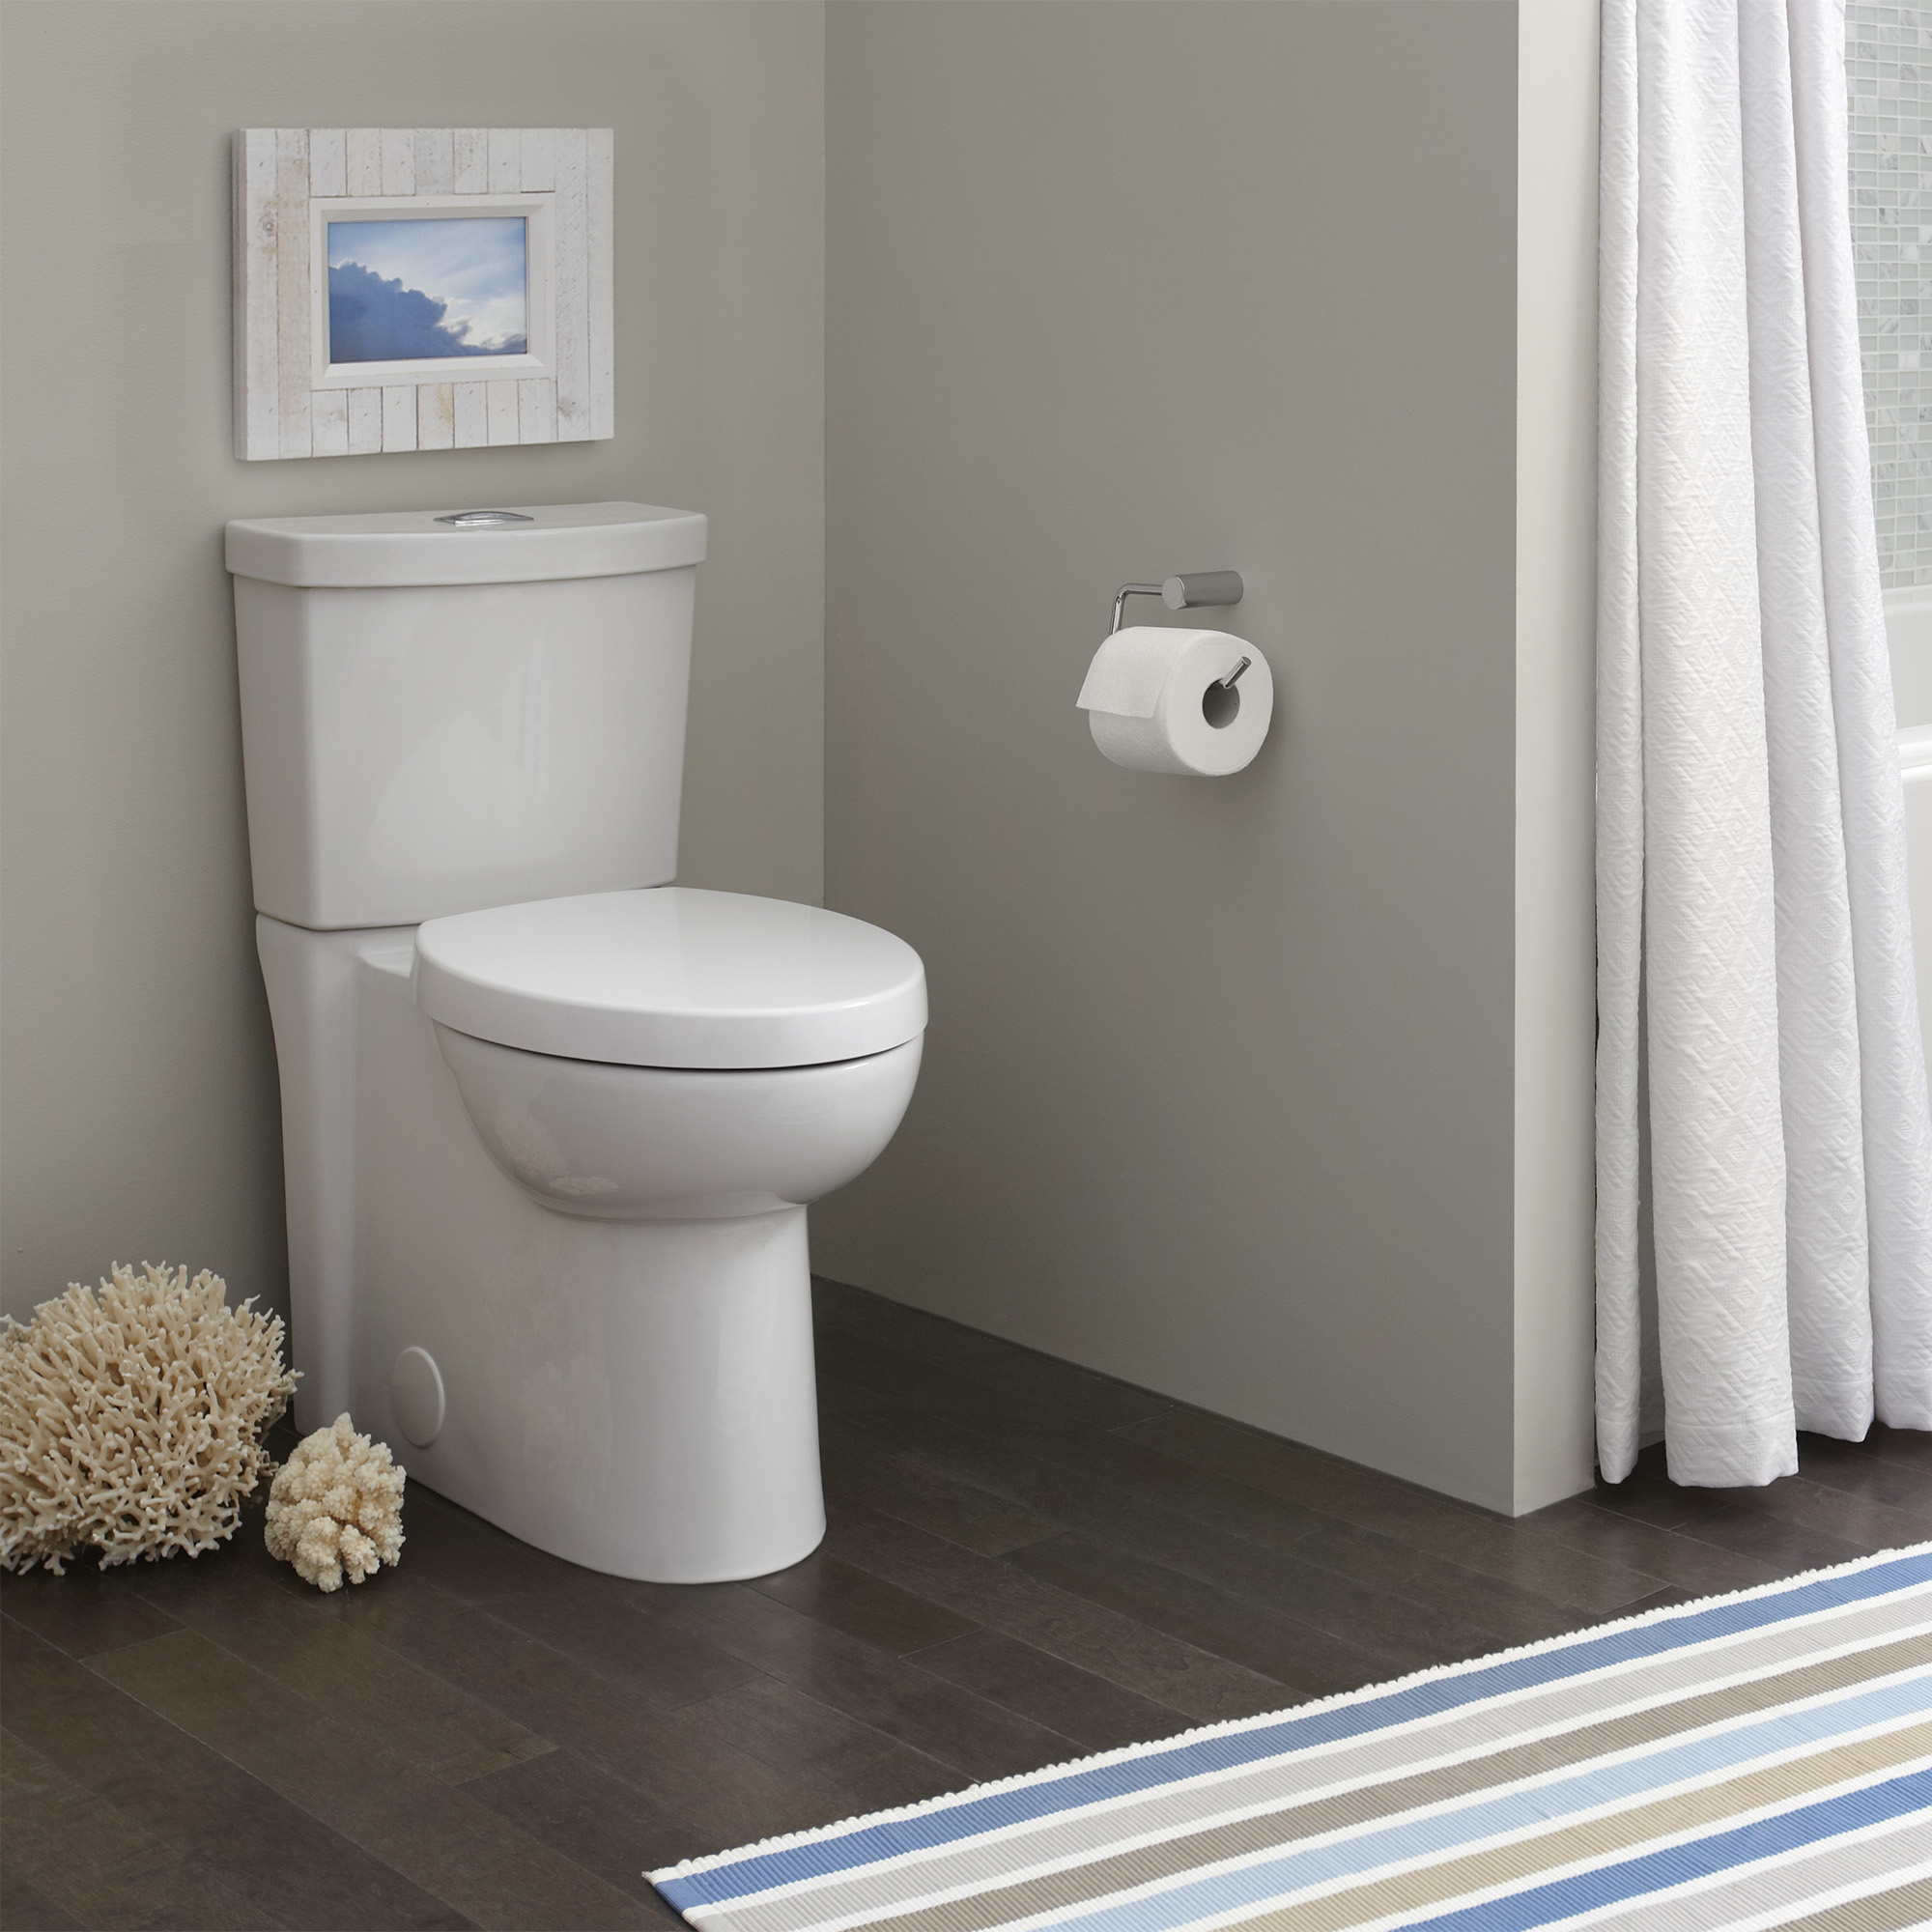 Studio™ Skirted Two-Piece Dual Flush 1.6 gpf/6.0 Lpf and 1.1 gpf/4.2 Lpf Chair Height Elongated Toilet With Seat